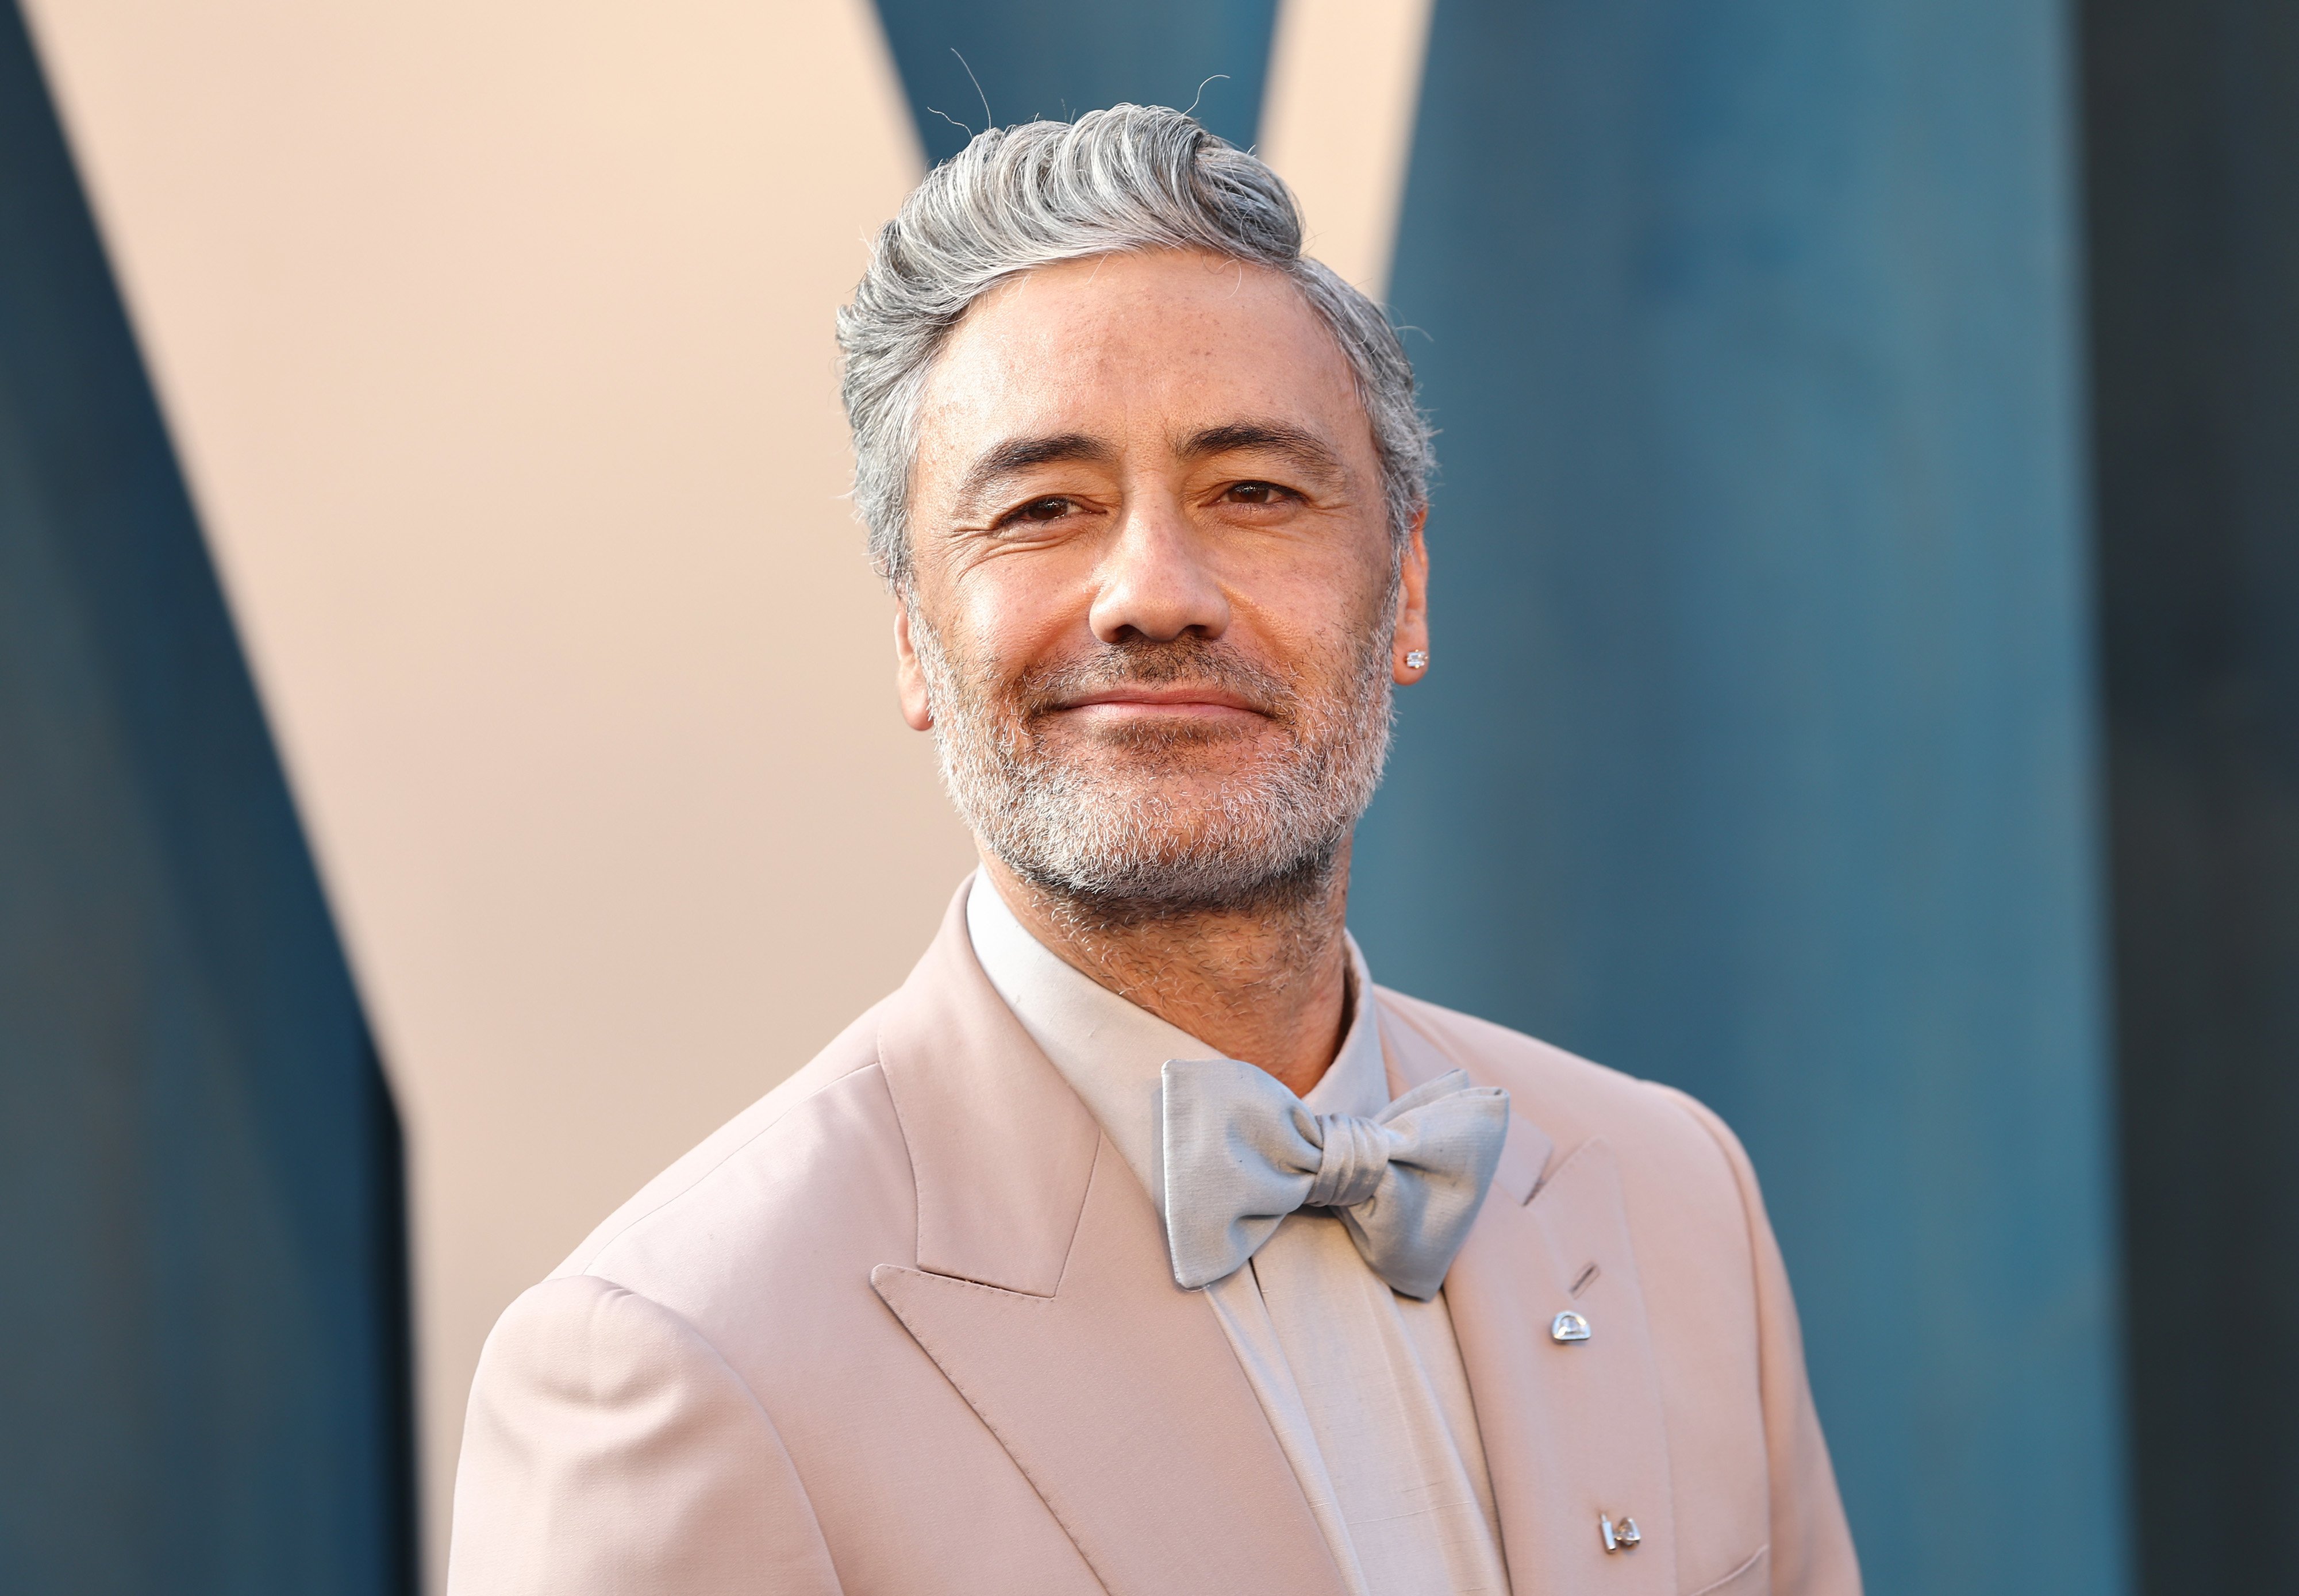 Taika Waititi, who directed 'Thor: Love and Thunder,' wears a light pink suit over a white button-up shirt and silver bow tie.